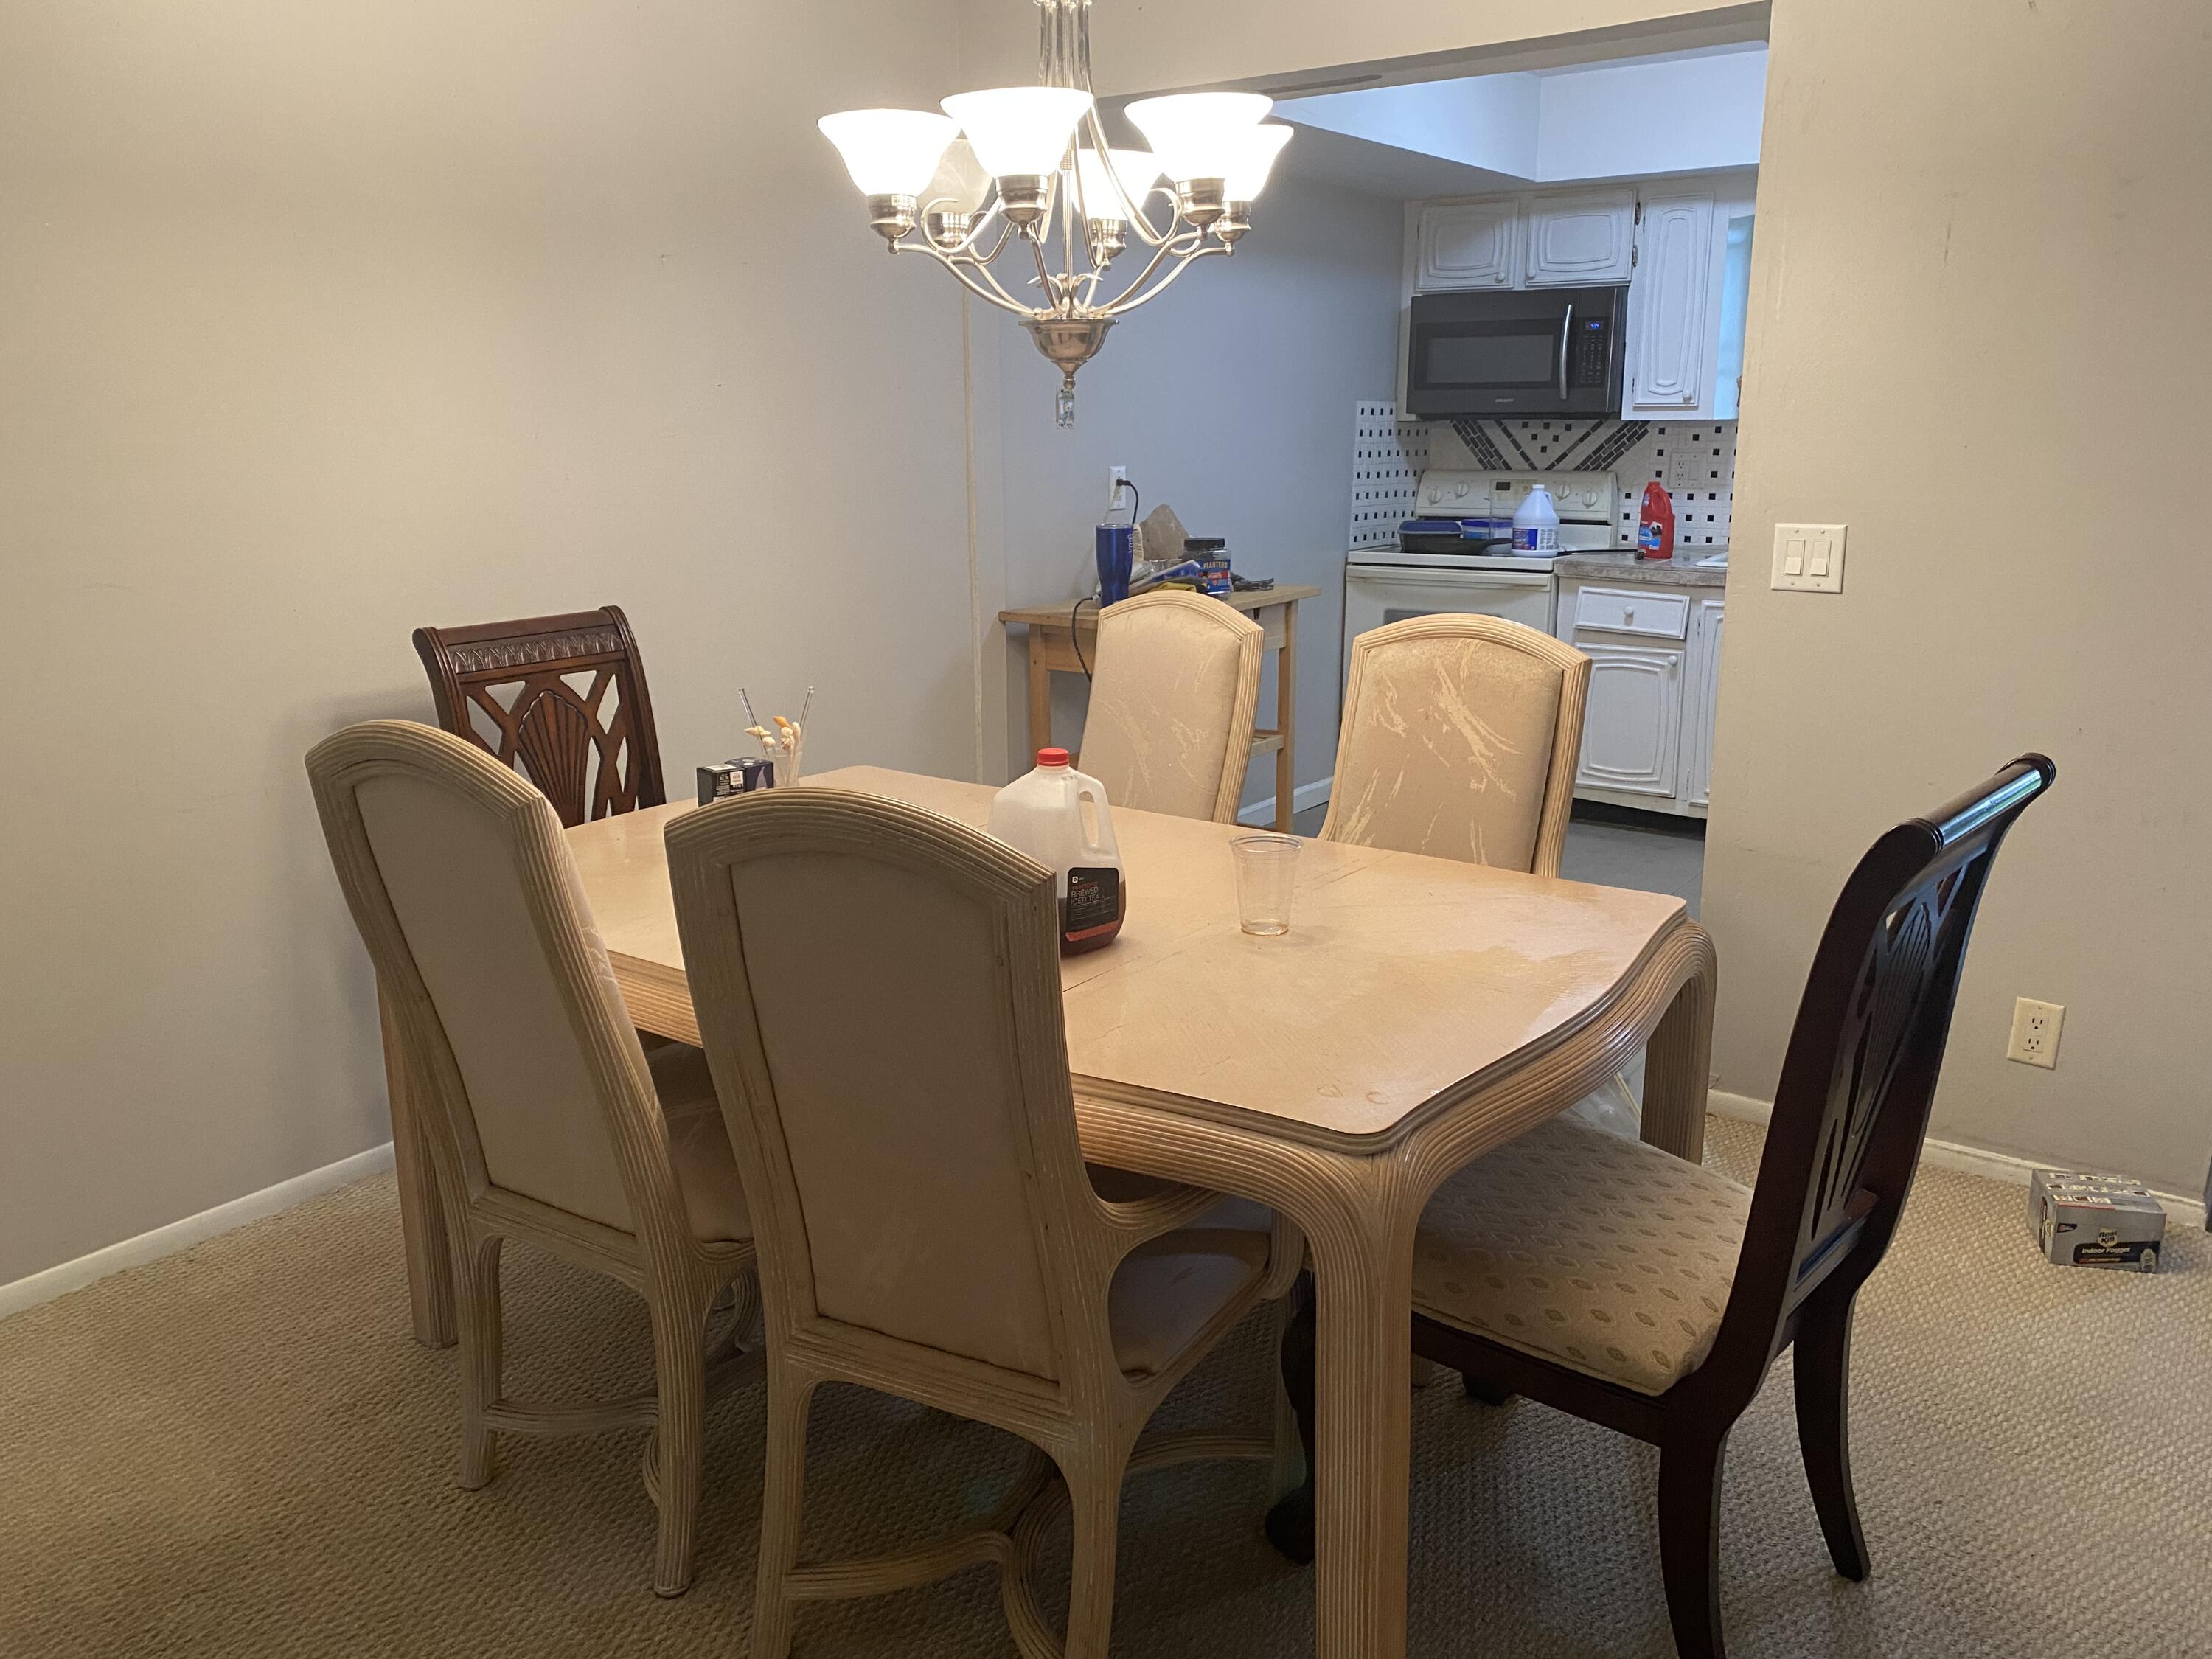 a view of a dining room with furniture